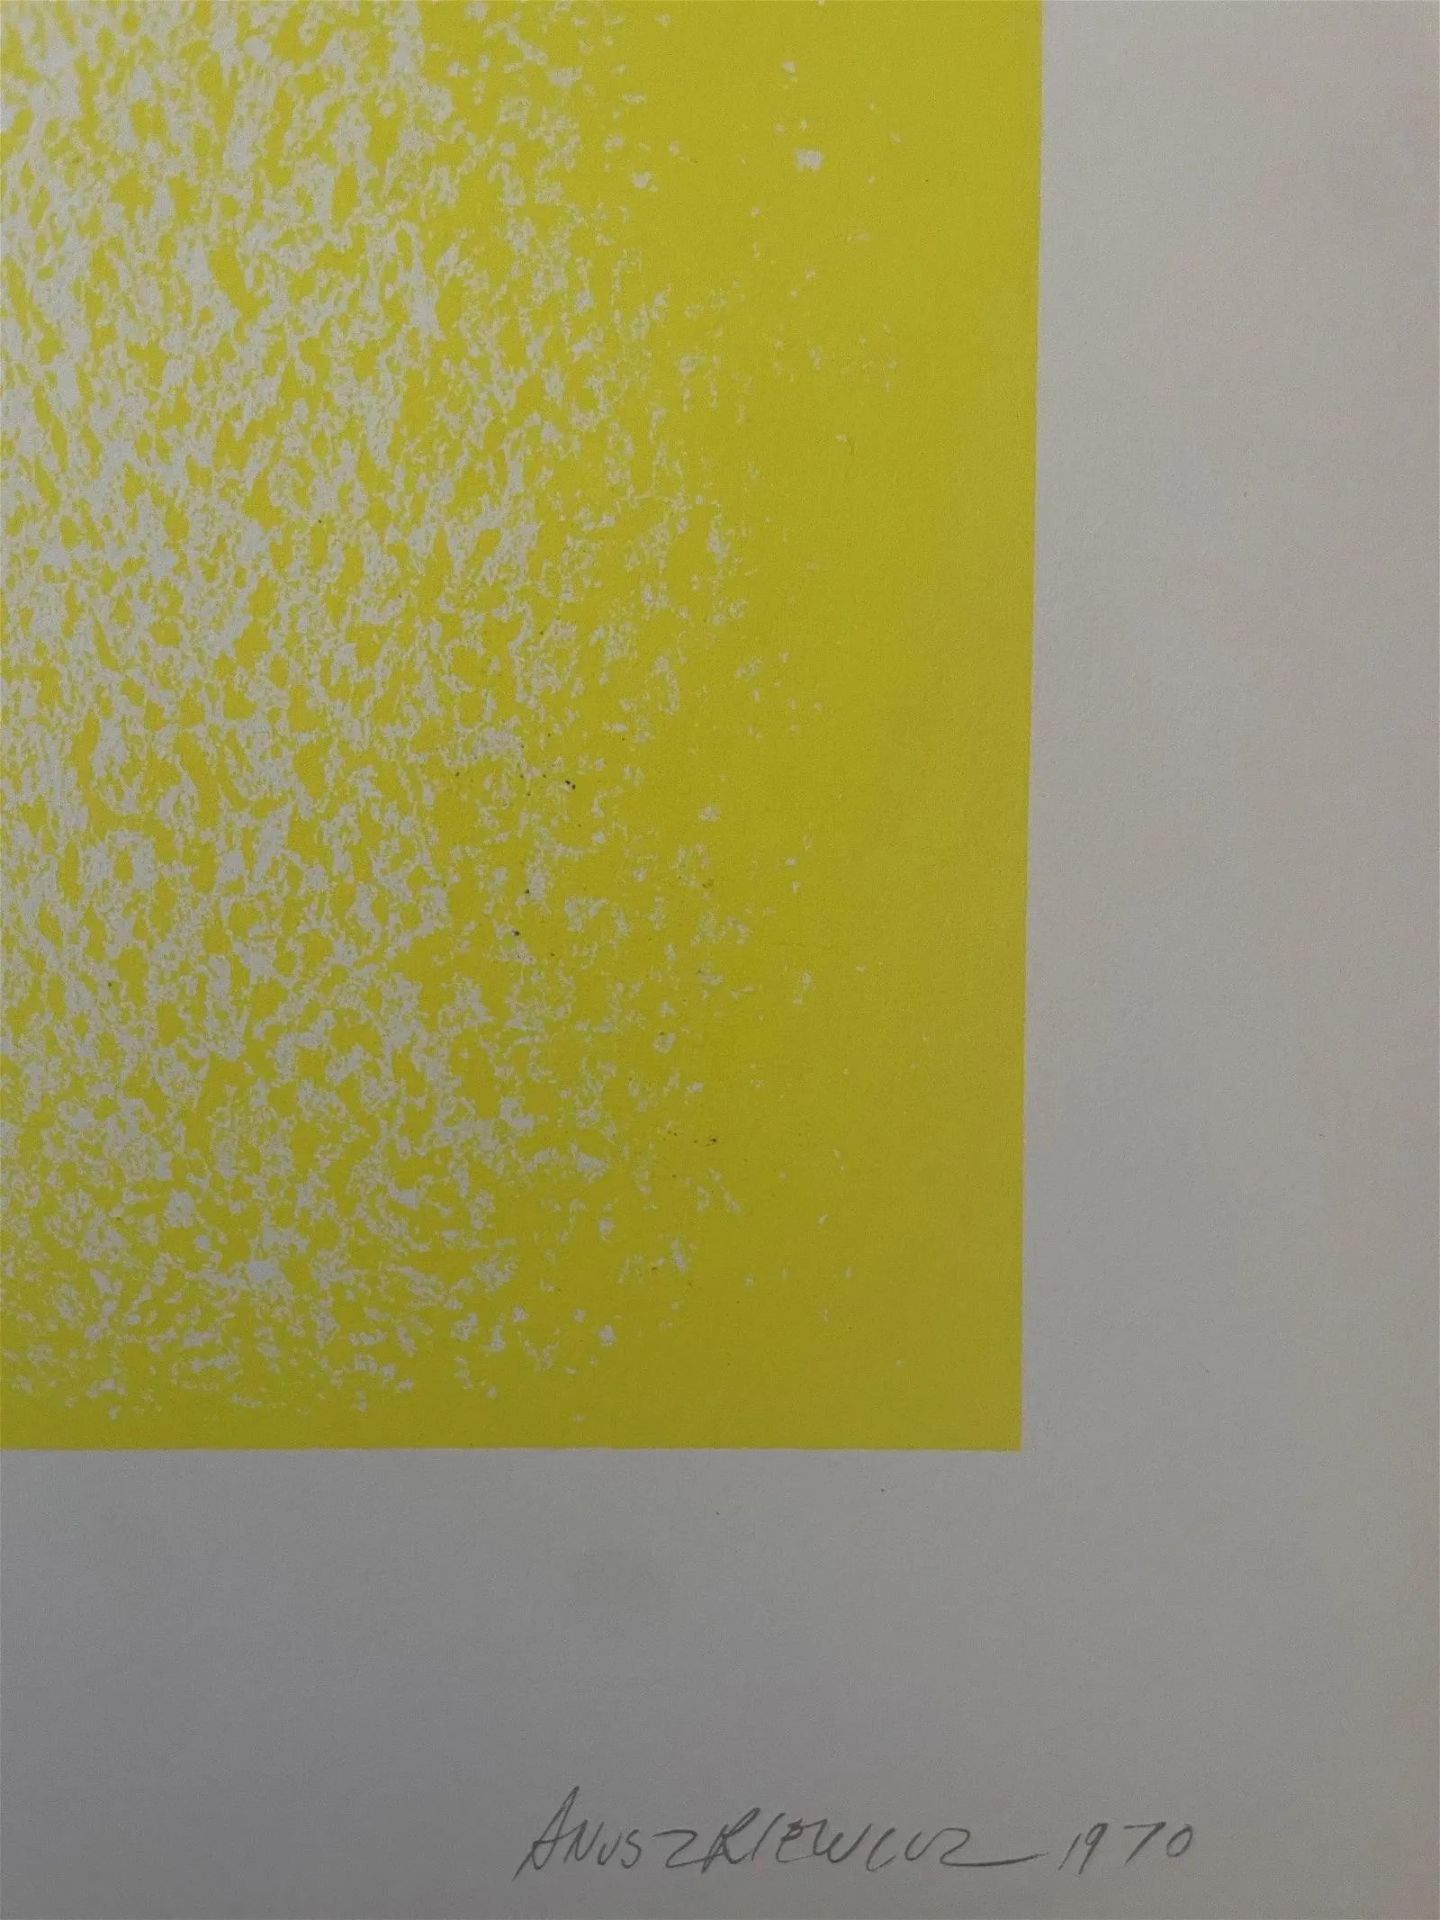 Richard Anuszkiewicz "Yellow Reversed, 1970" Offset Lithograph, Plate Signed, Dated - Image 2 of 6